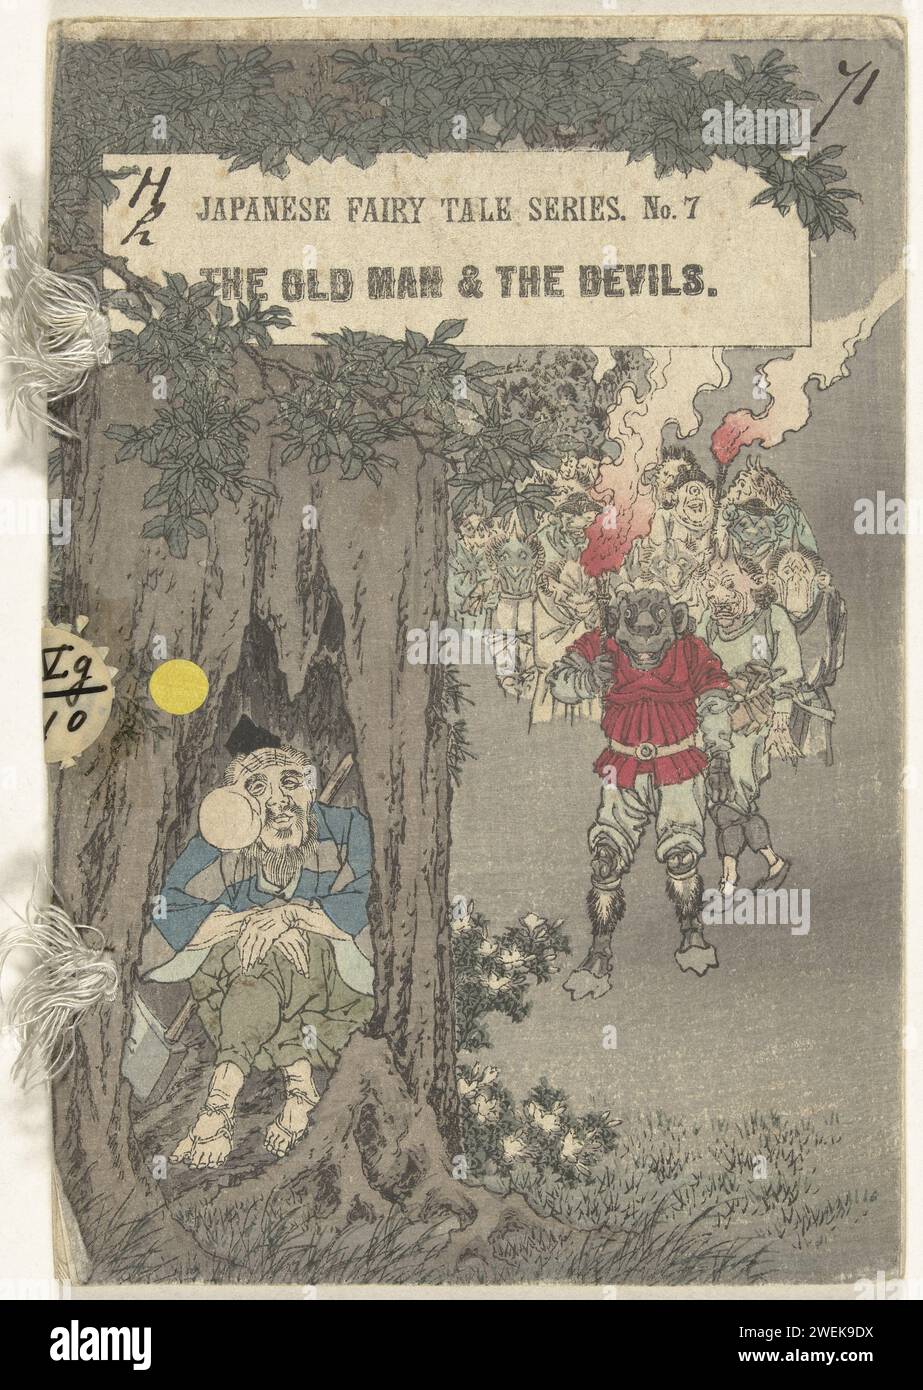 The old man and the devils, 1886 book Number seven from a series with Japanese fairy tales, in English; Cover with title and image of man in tree trunk and procession devils; Inside cover, colophon; Ten magazines, English text with illustrations.  paper color woodcut Stock Photo